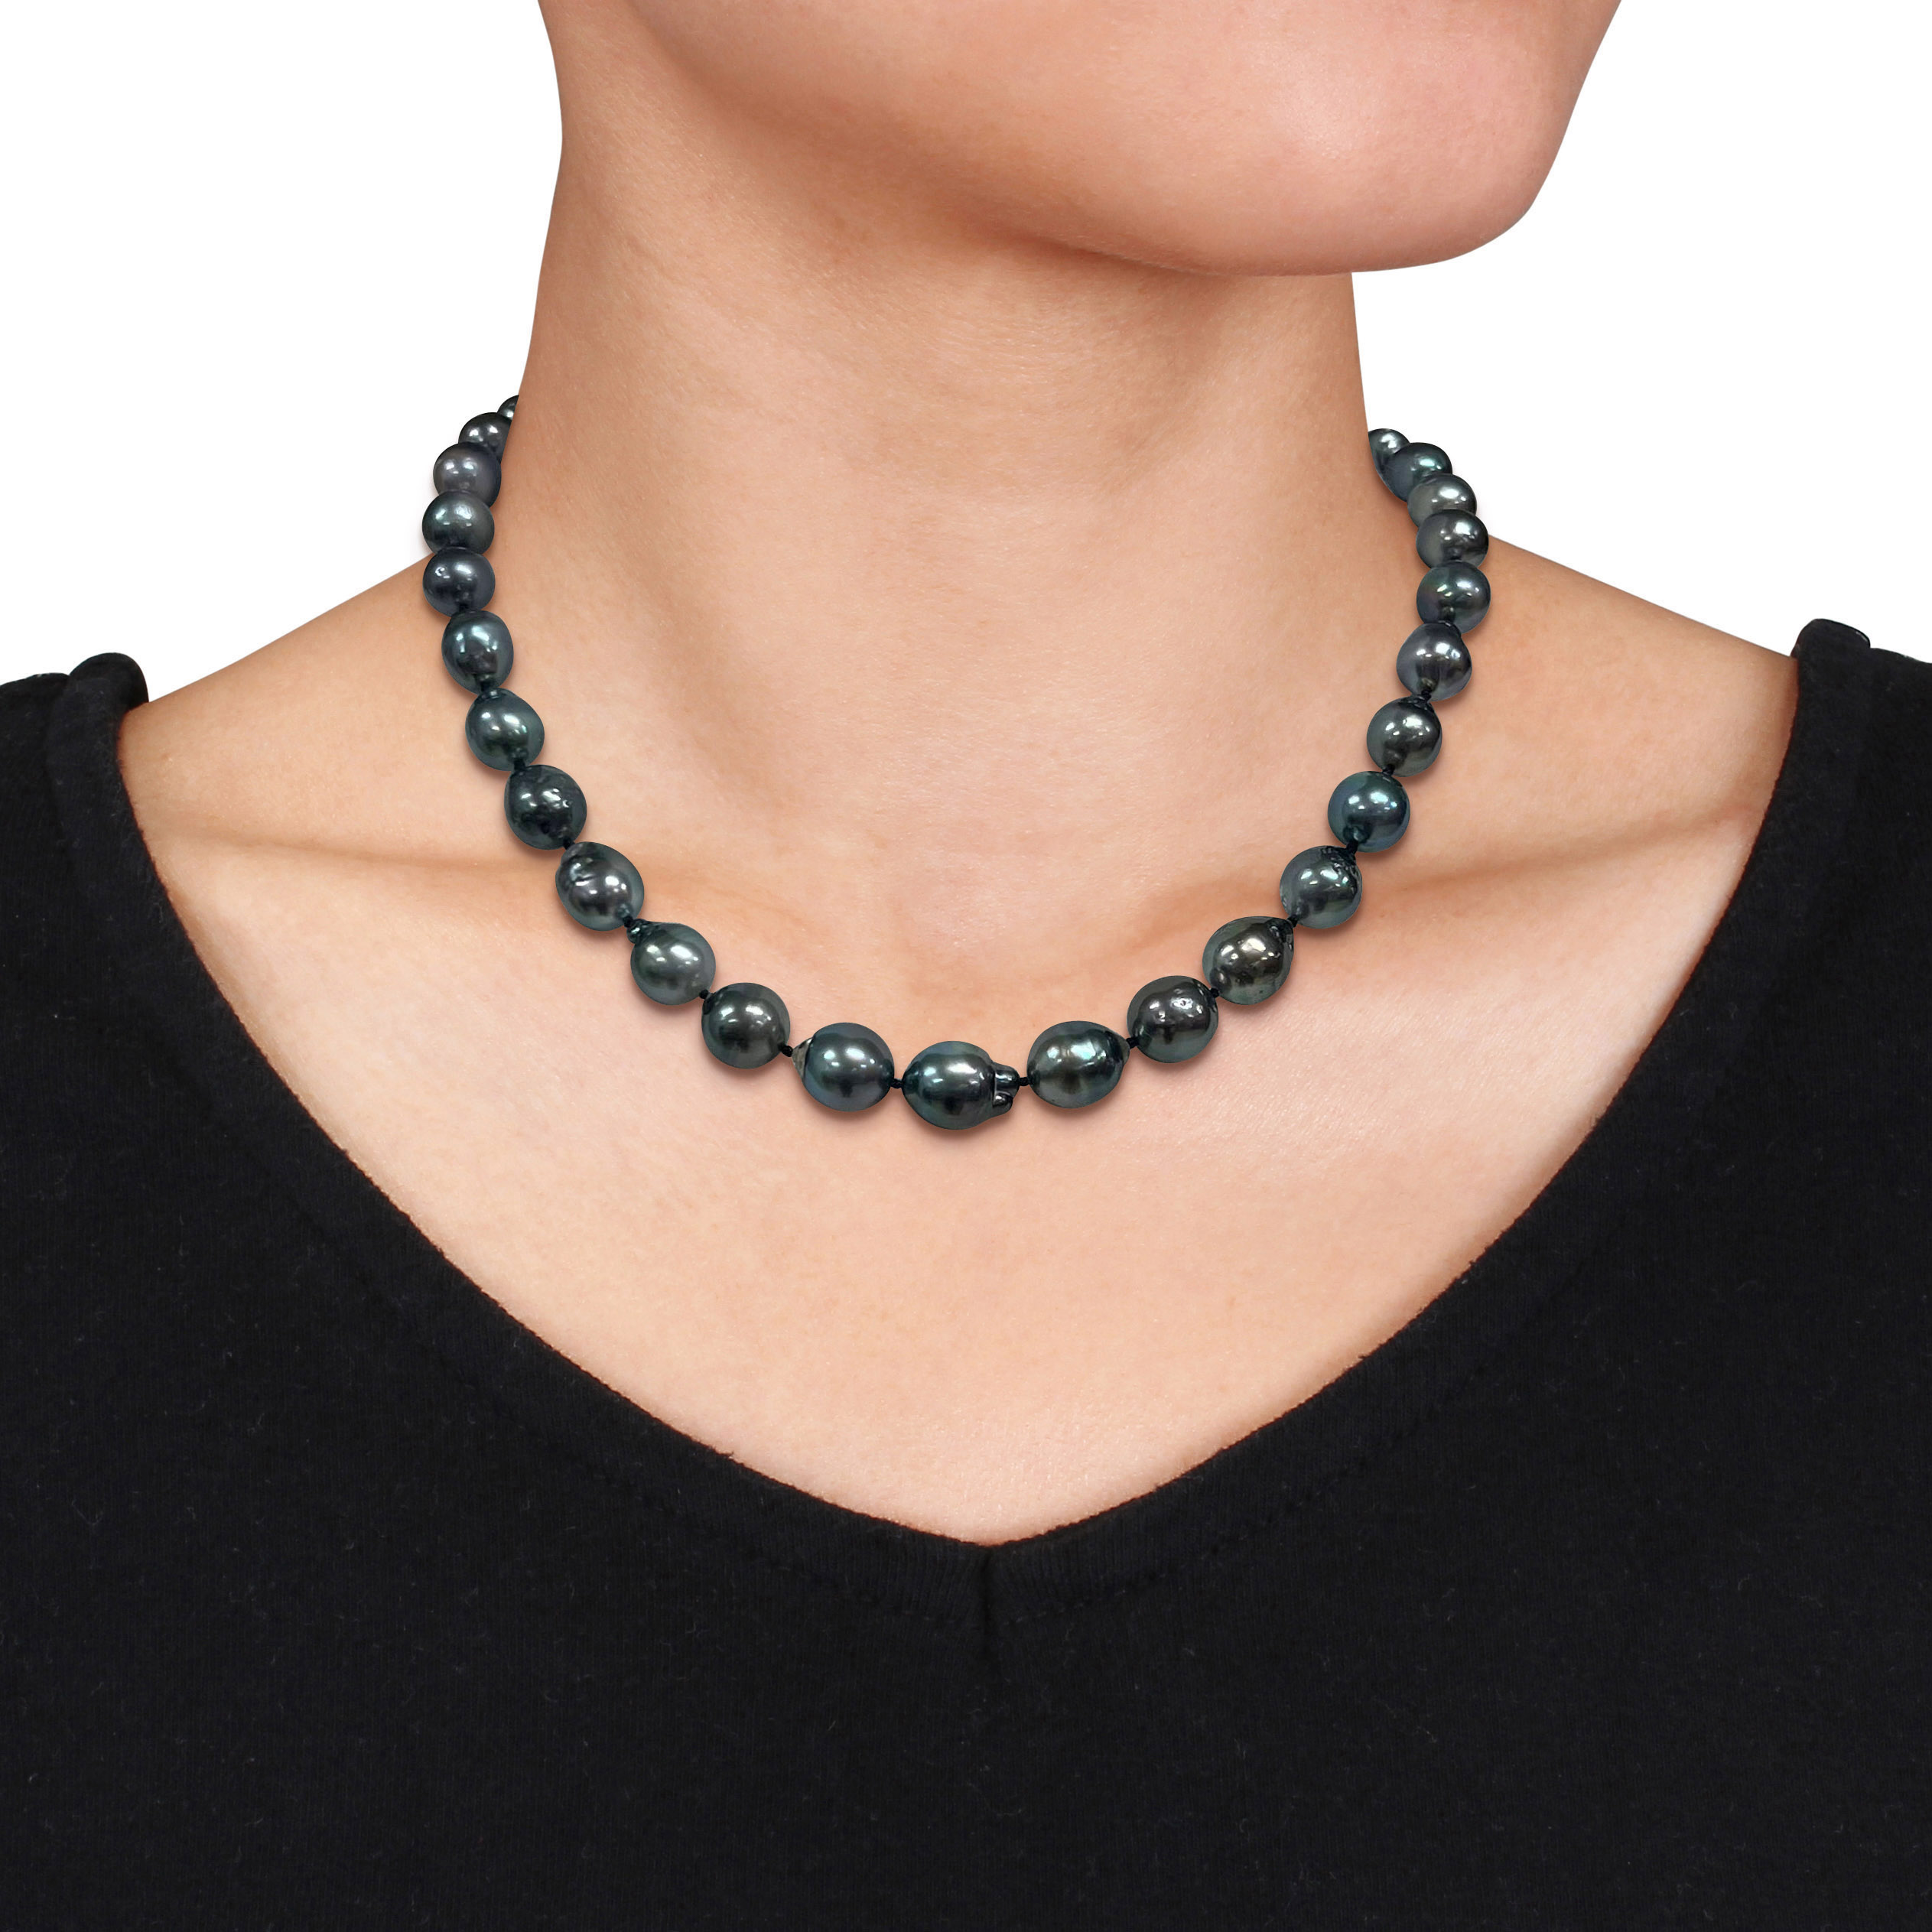 8-10 MM Black Tahitian Cultured Pearl Necklace in Sterling Silver - 18 in